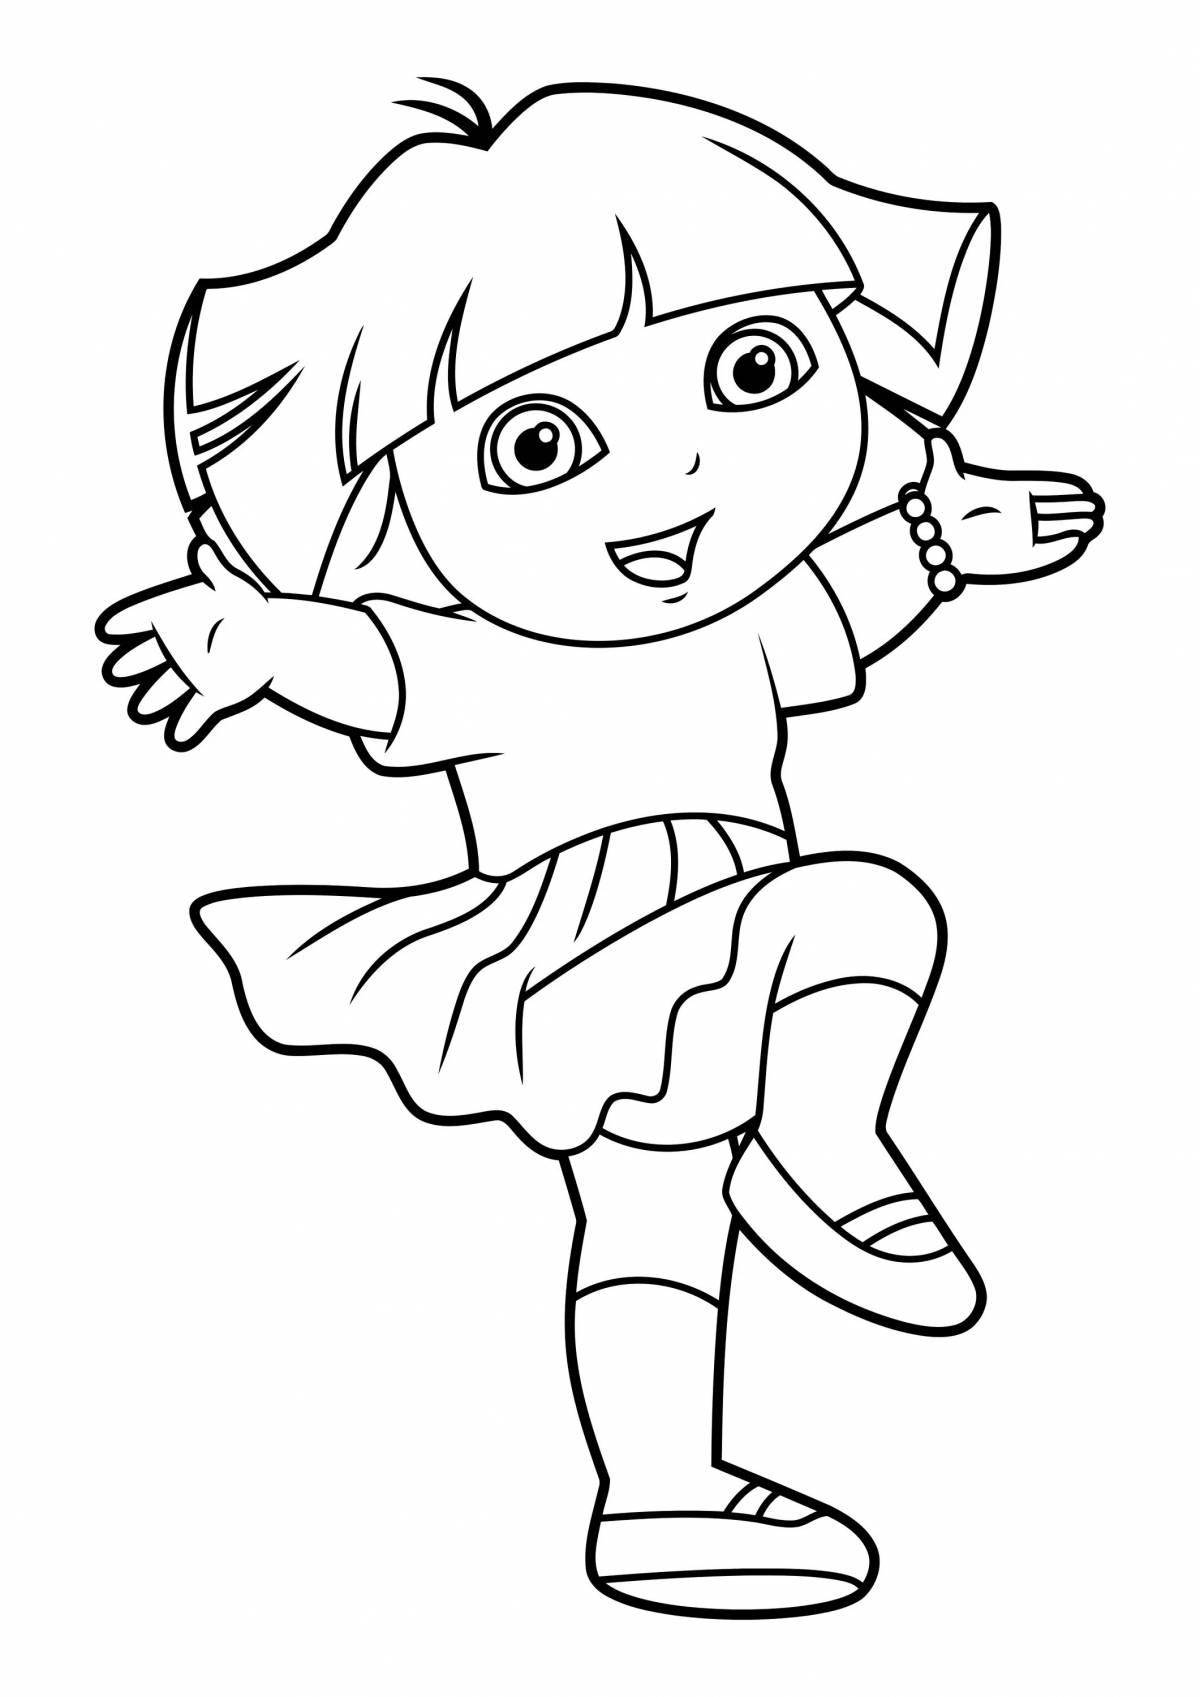 Adorable exercise coloring book for kids